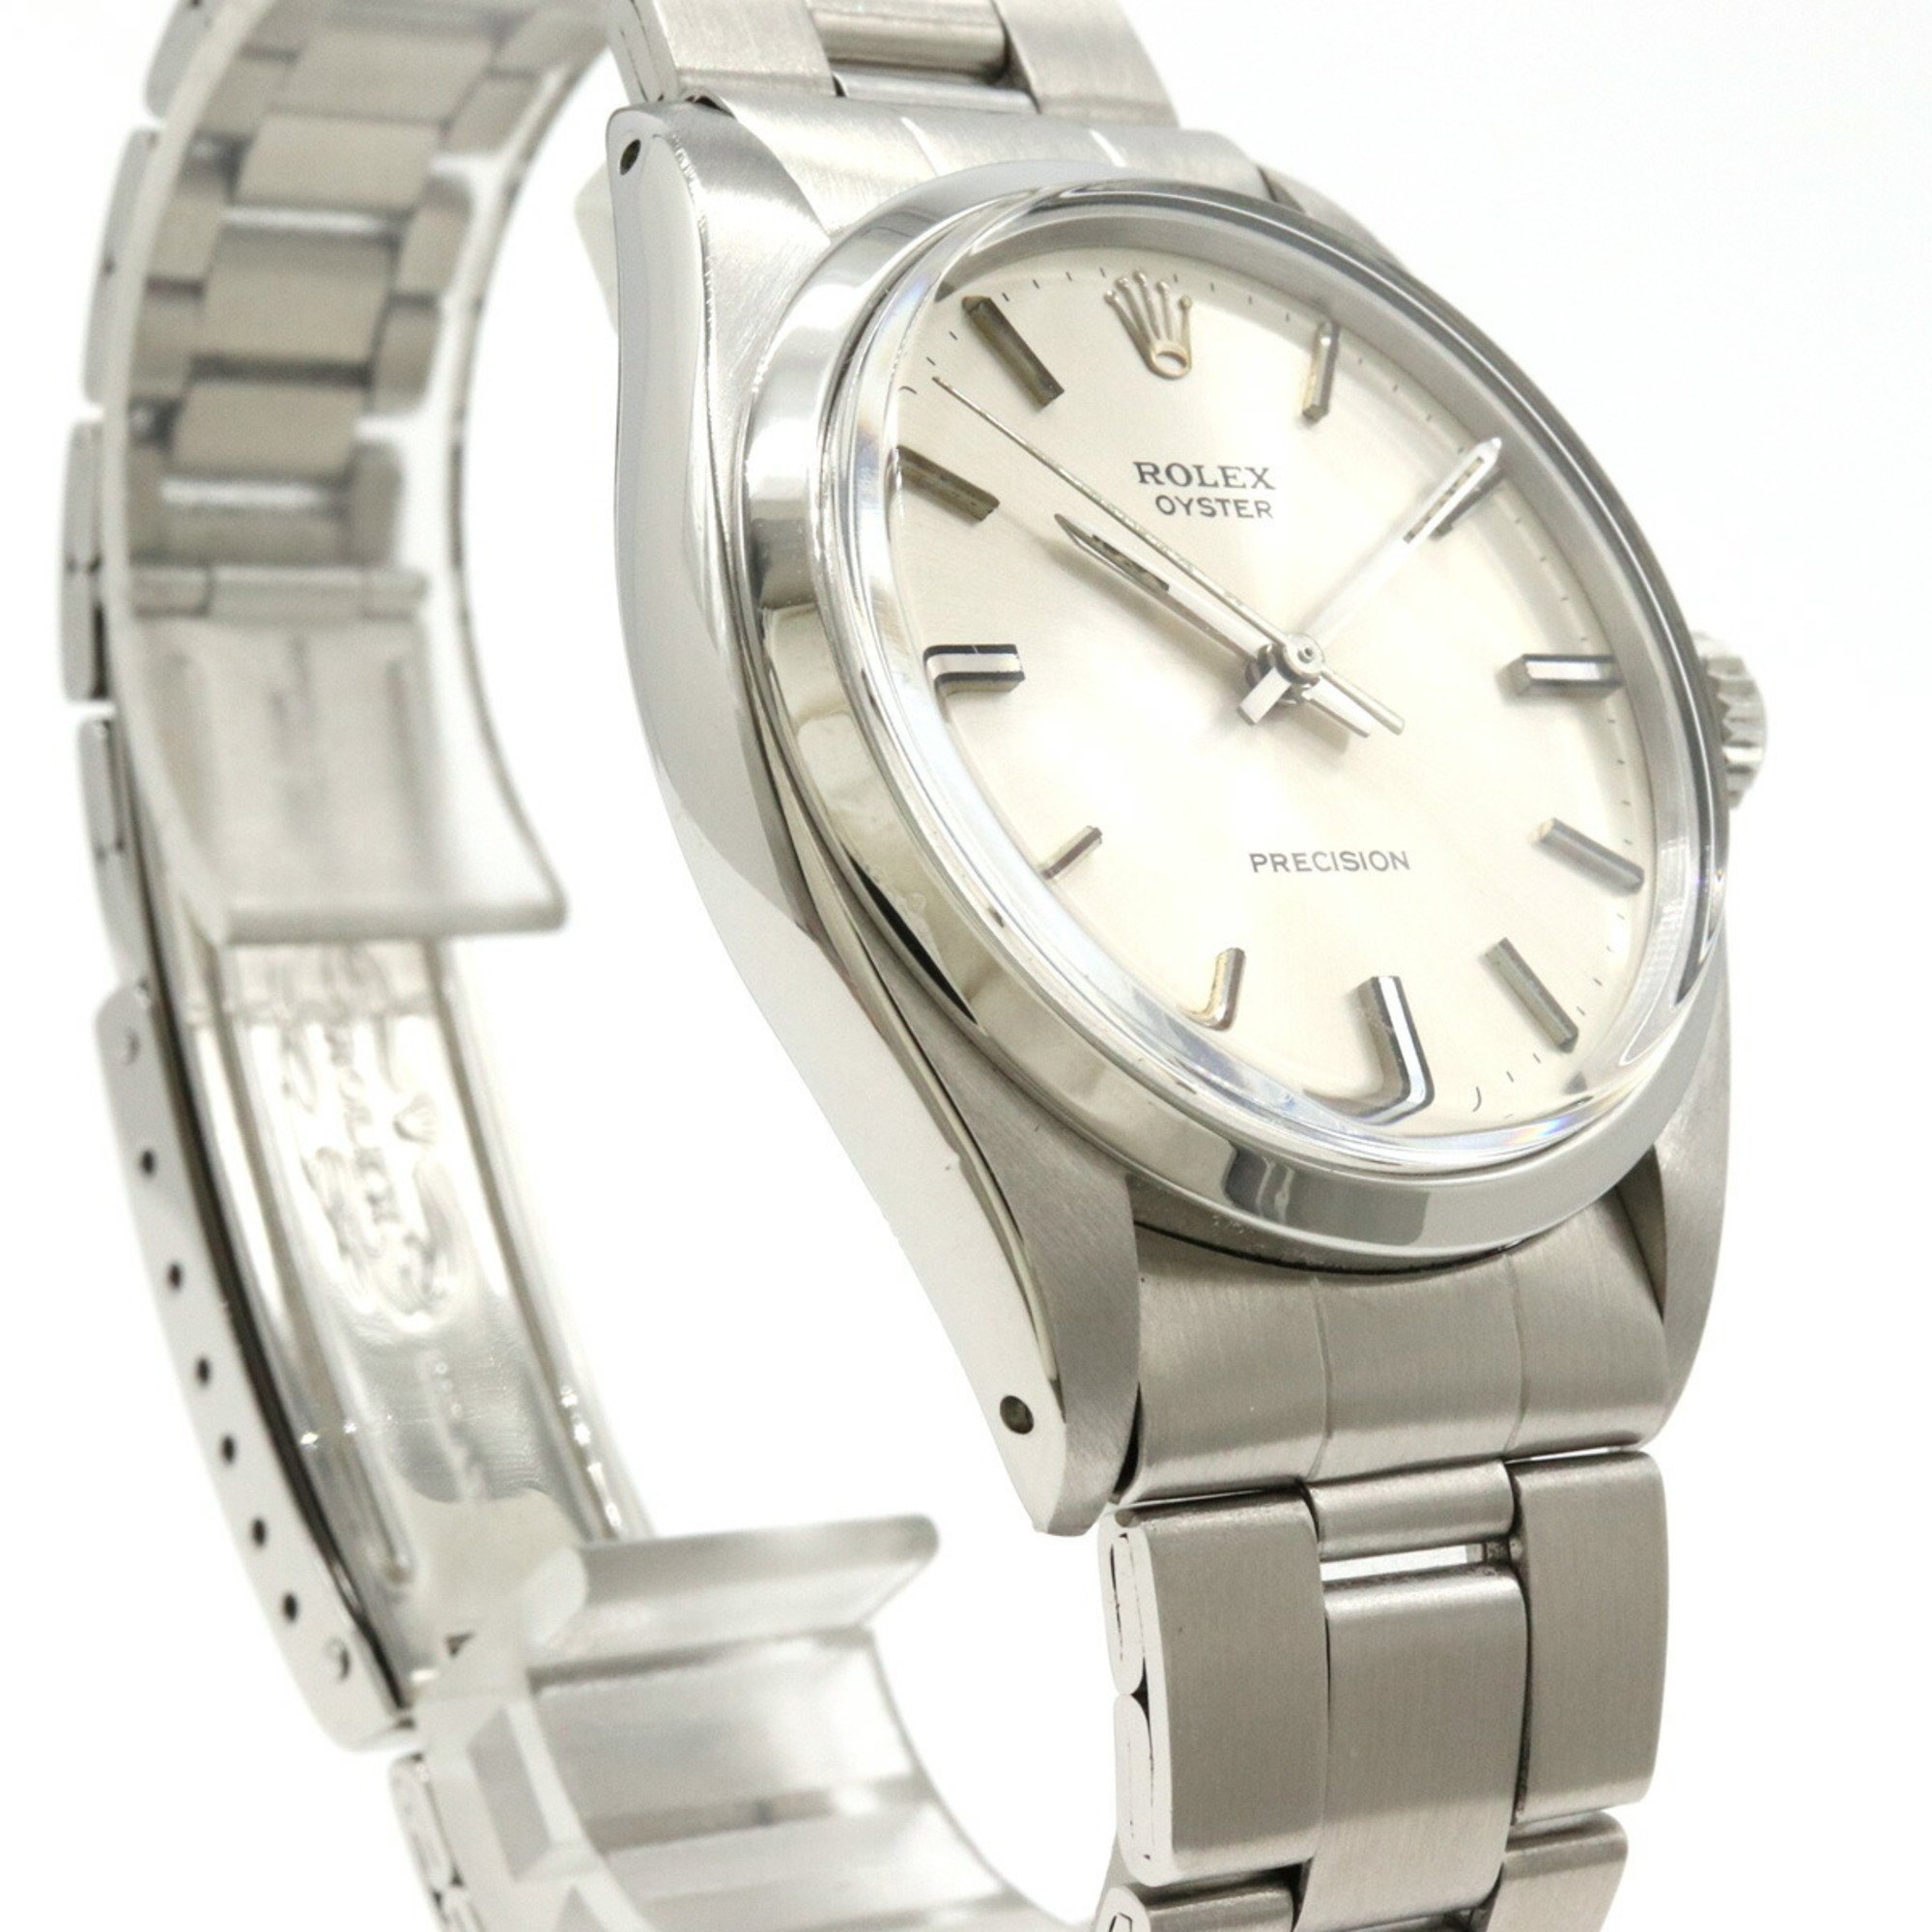 ROLEX Rolex Oyster Precision Silver Dial Stainless Steel Men's Hand-wound Watch No. 37 6426